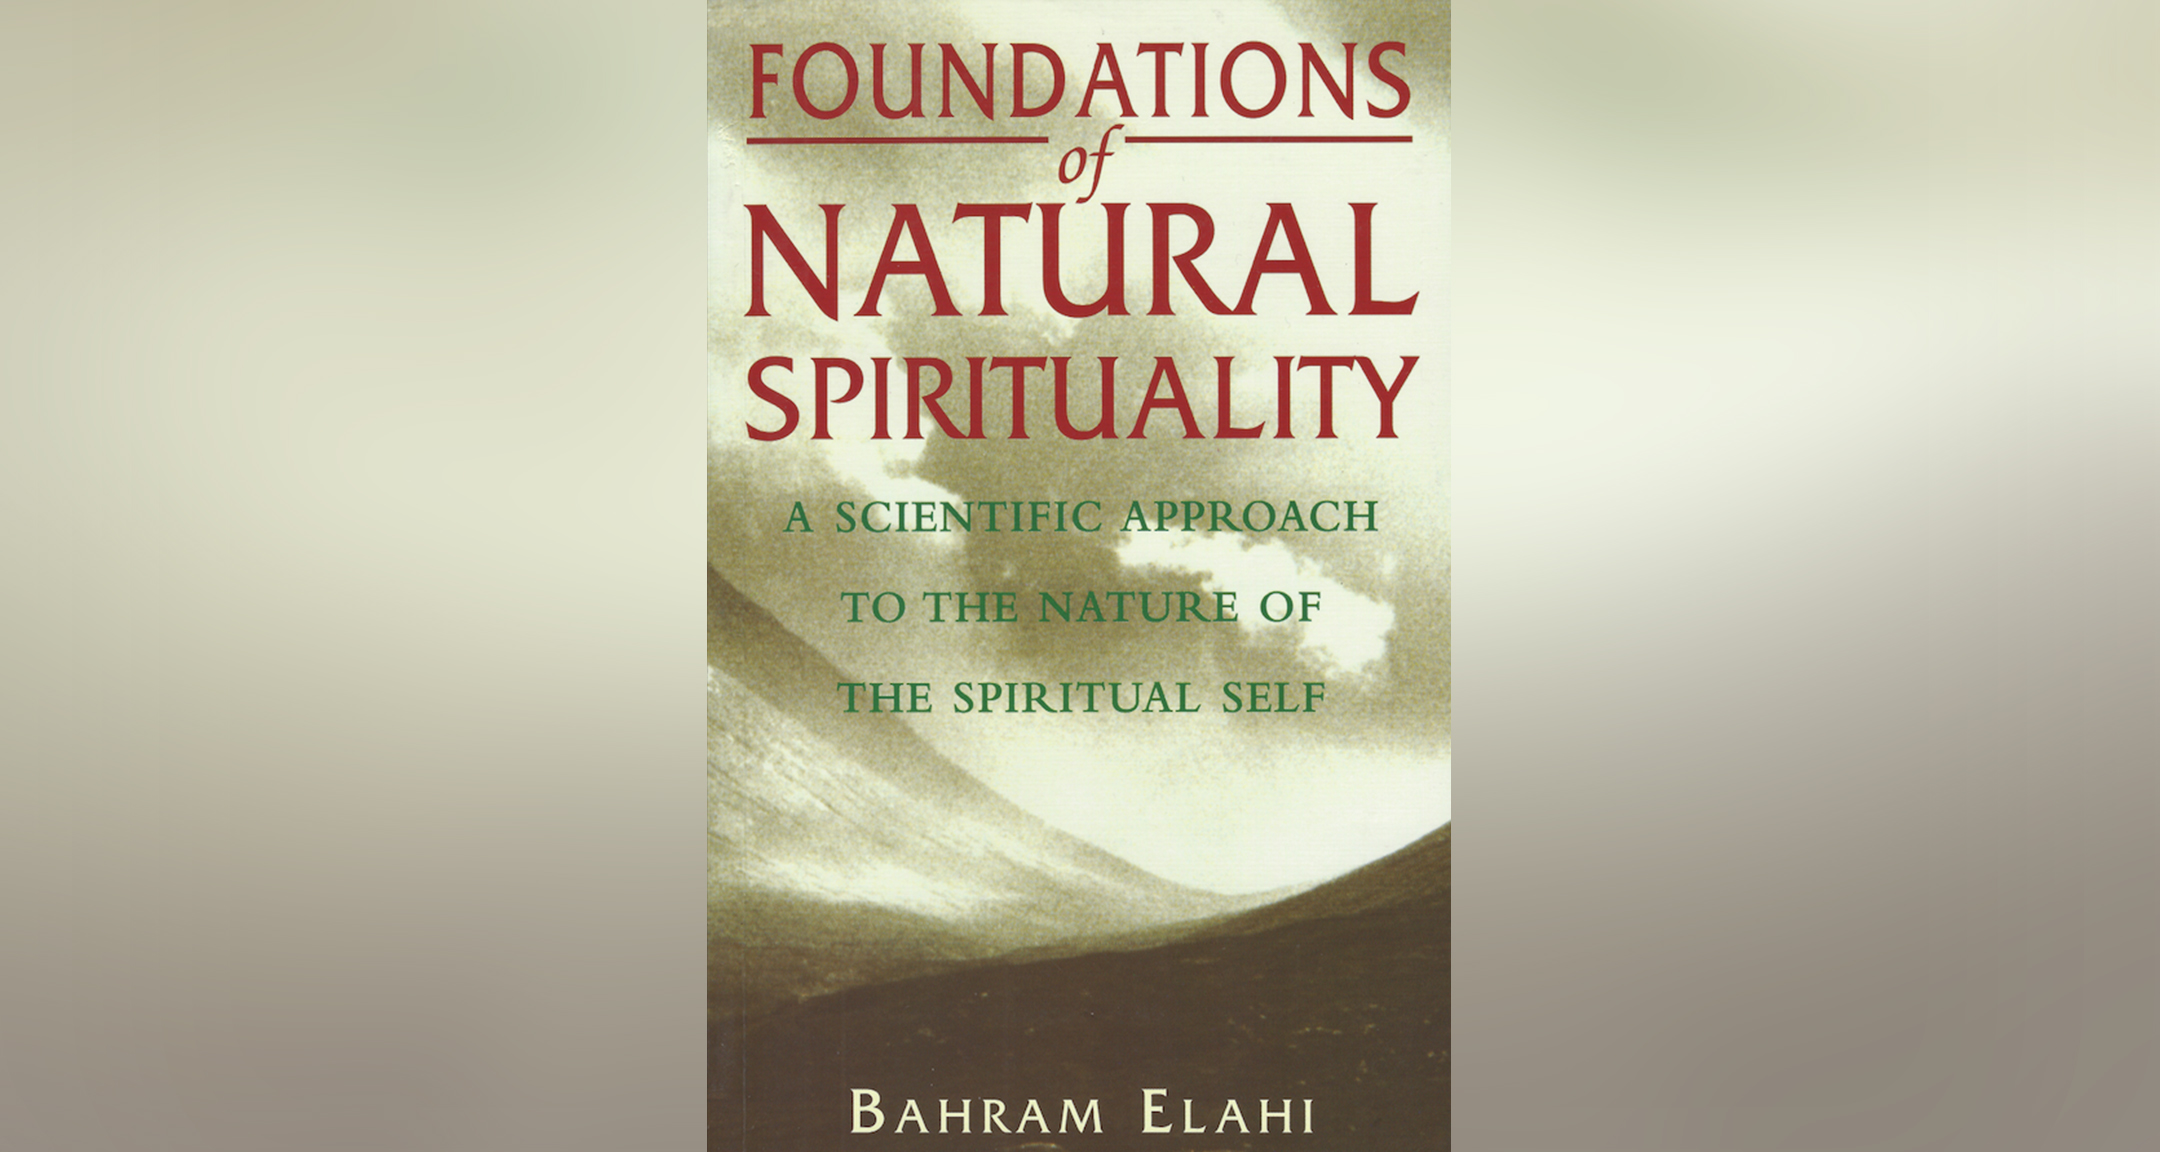 Foundations of Natural Spirituality